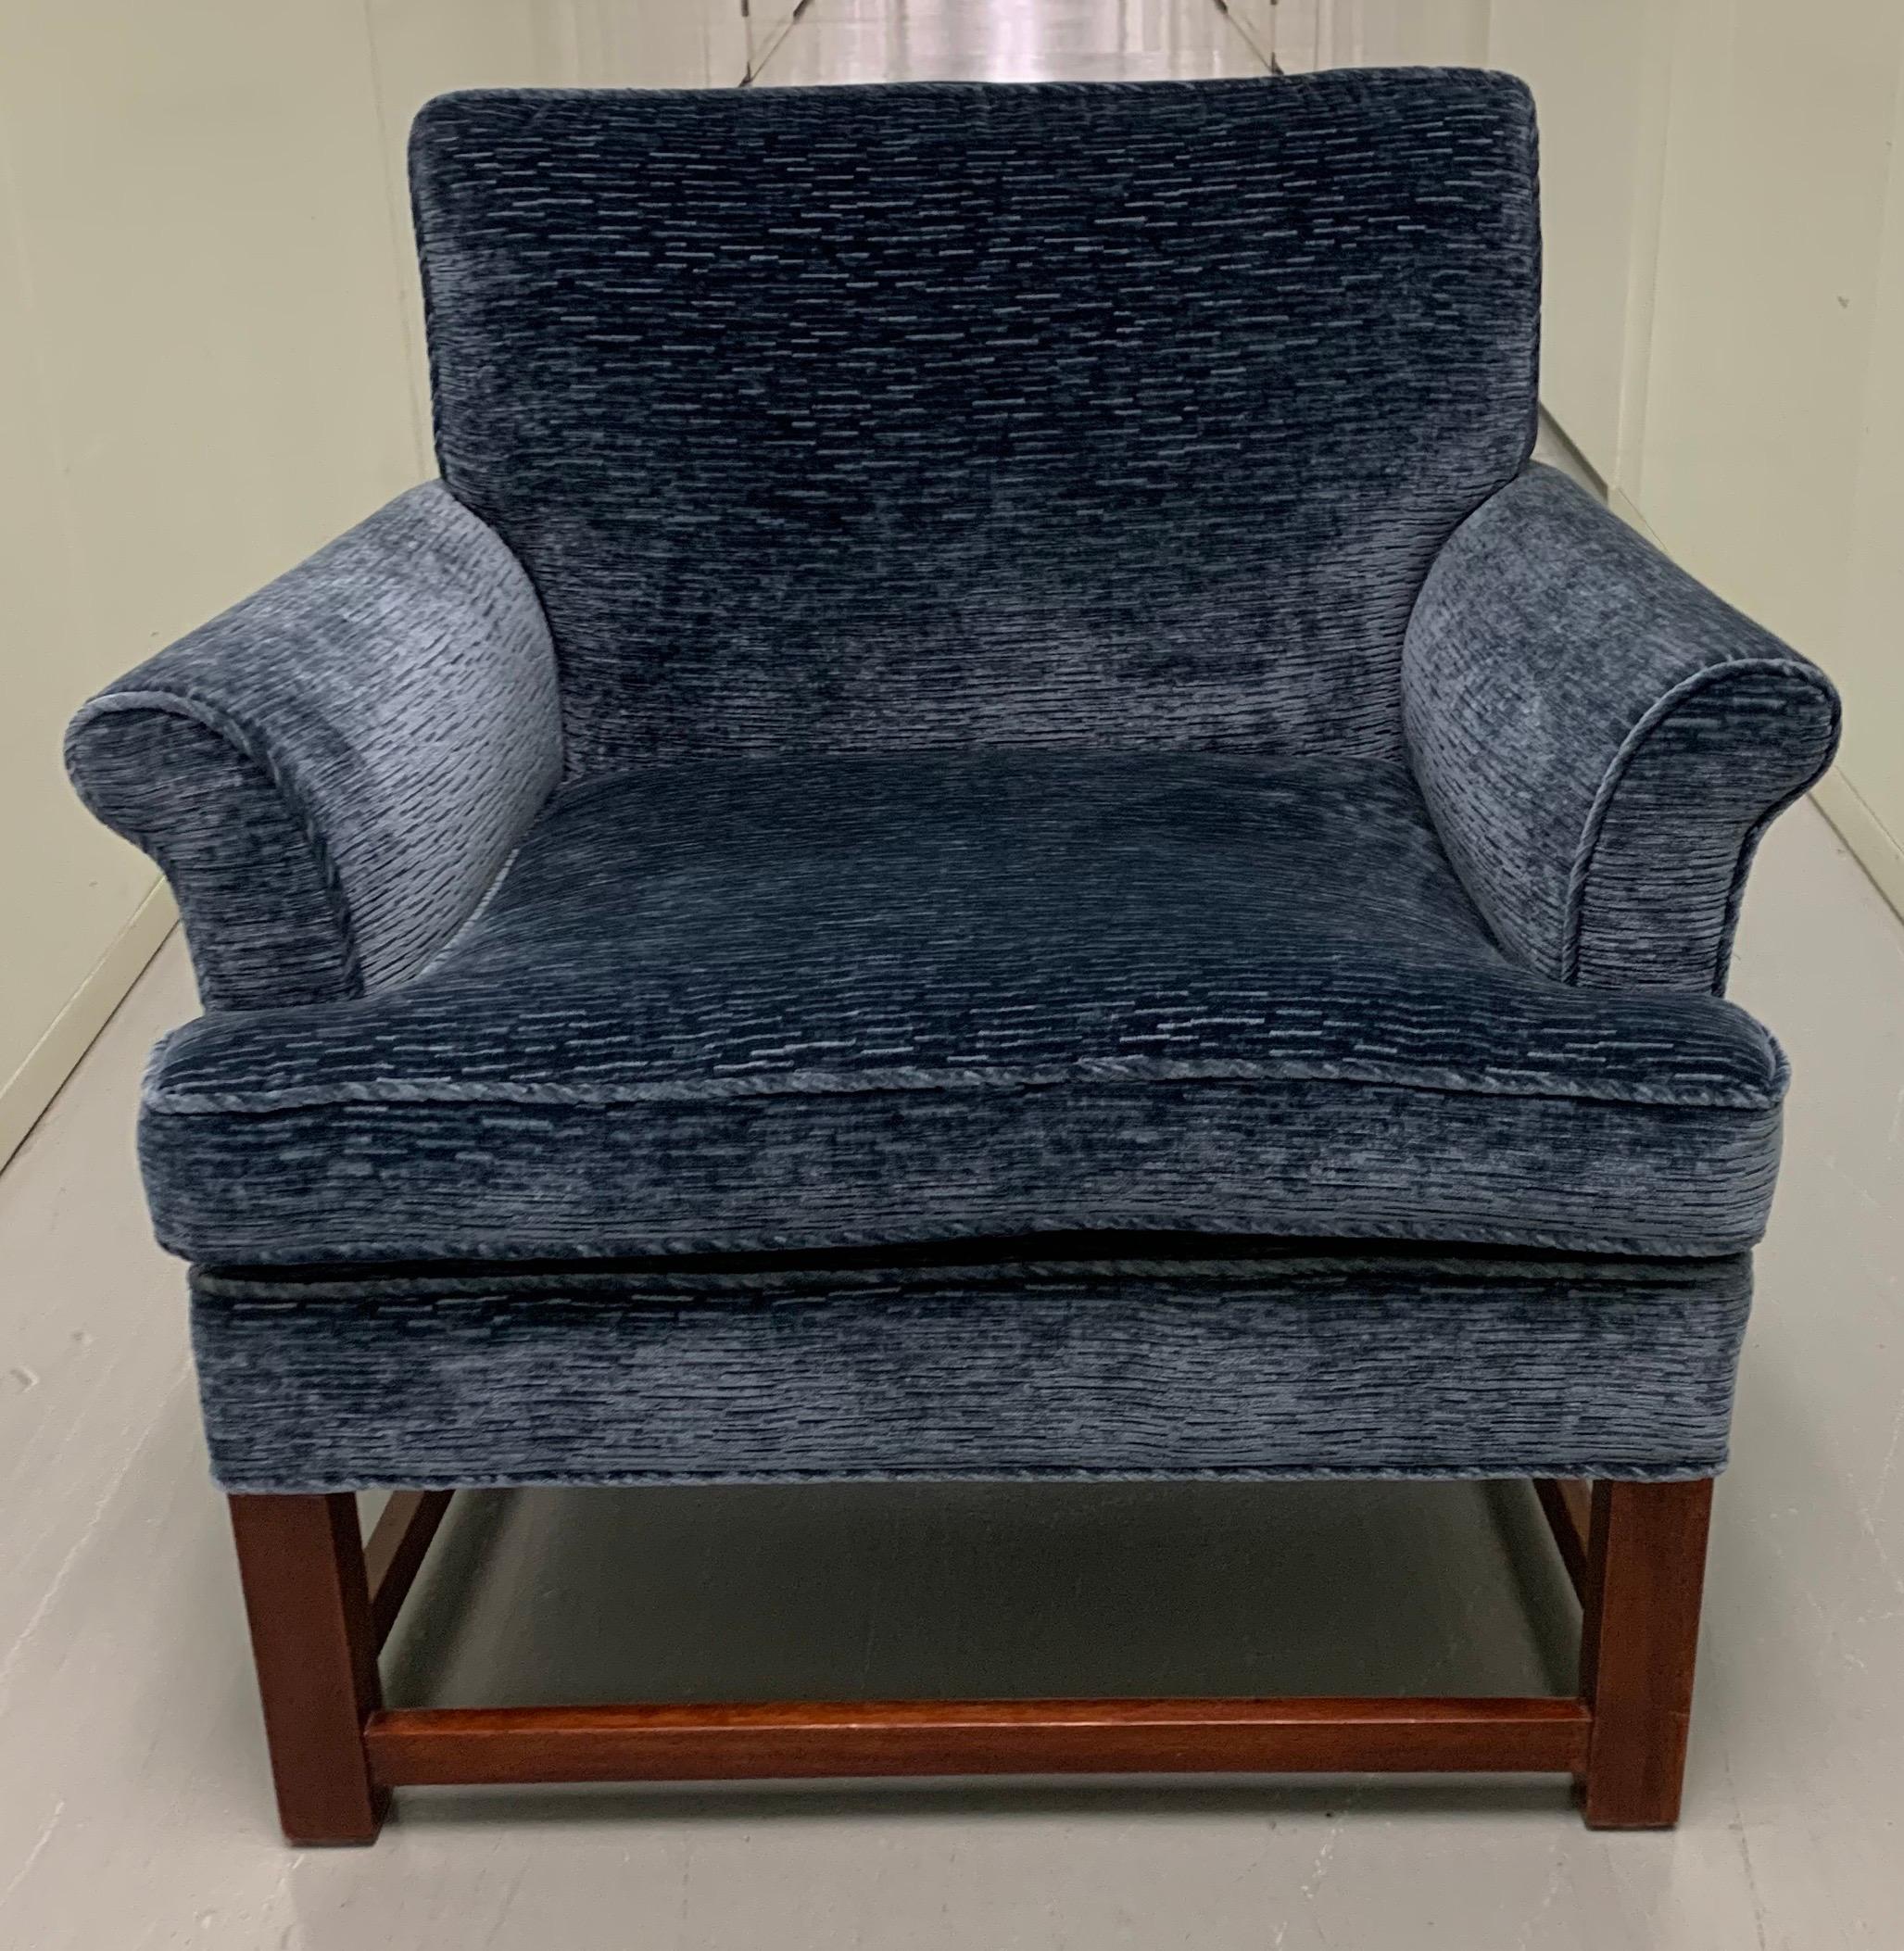 Pair of Widdicomb Parsons style armchairs. Newly upholstered in dark blue Kravet textured chenille with brass nailhead trim. New down wrapped foam seat cushions. Wooden bases are newly re-finished. Measures: Seat 17” tall x arm 23.5” tall.